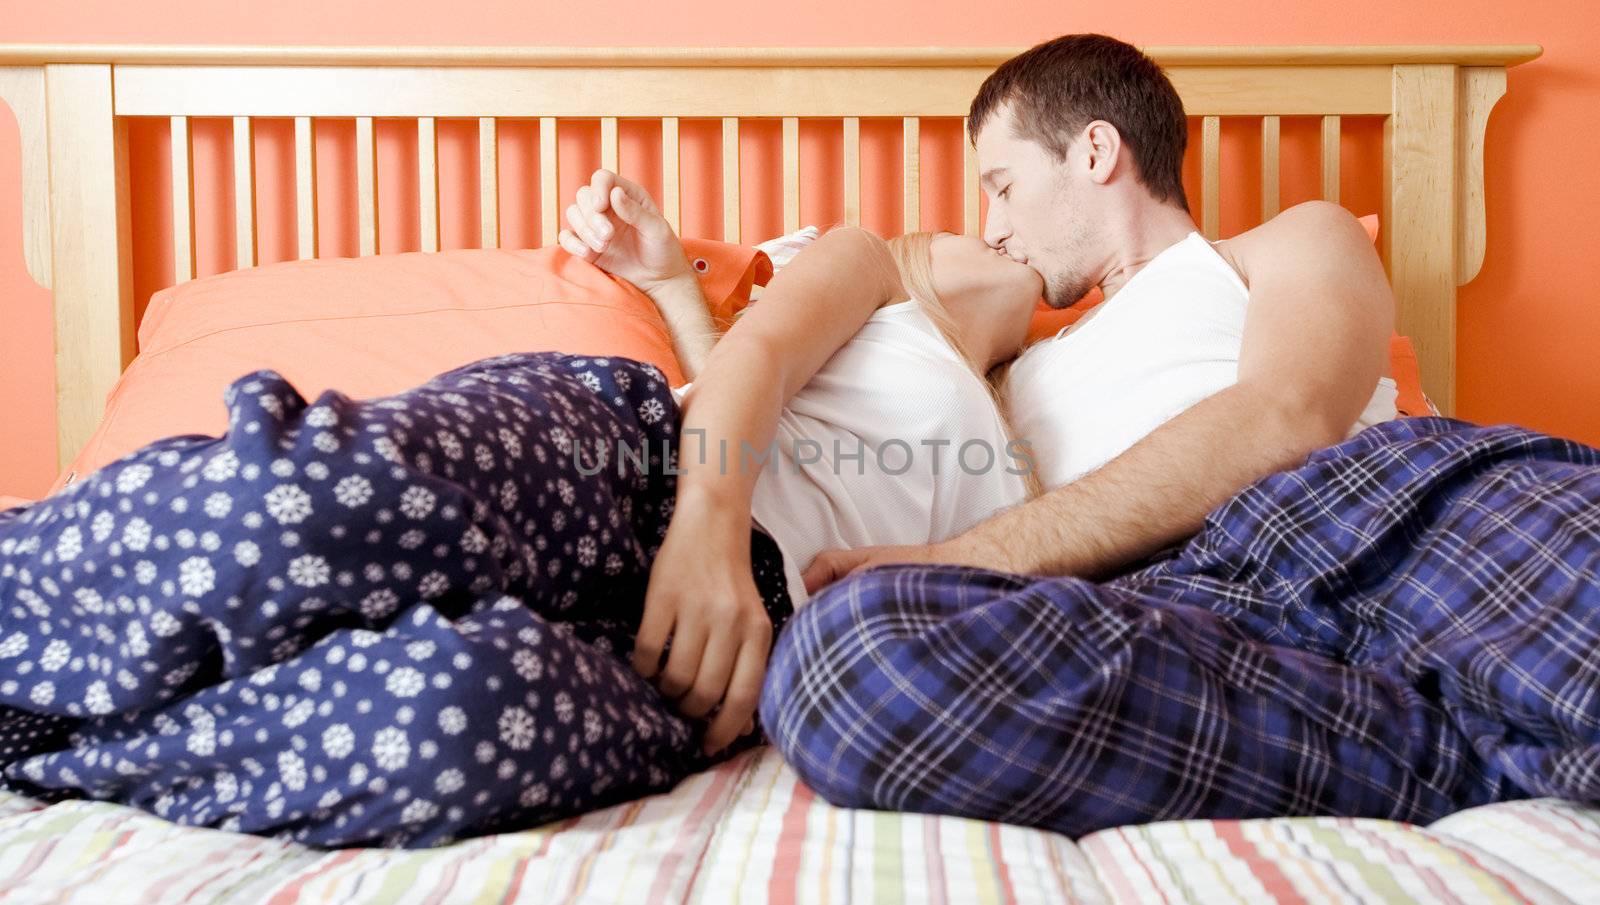 Young couple sitting on bed with stripped bedspread kissing. Horizontal shot.